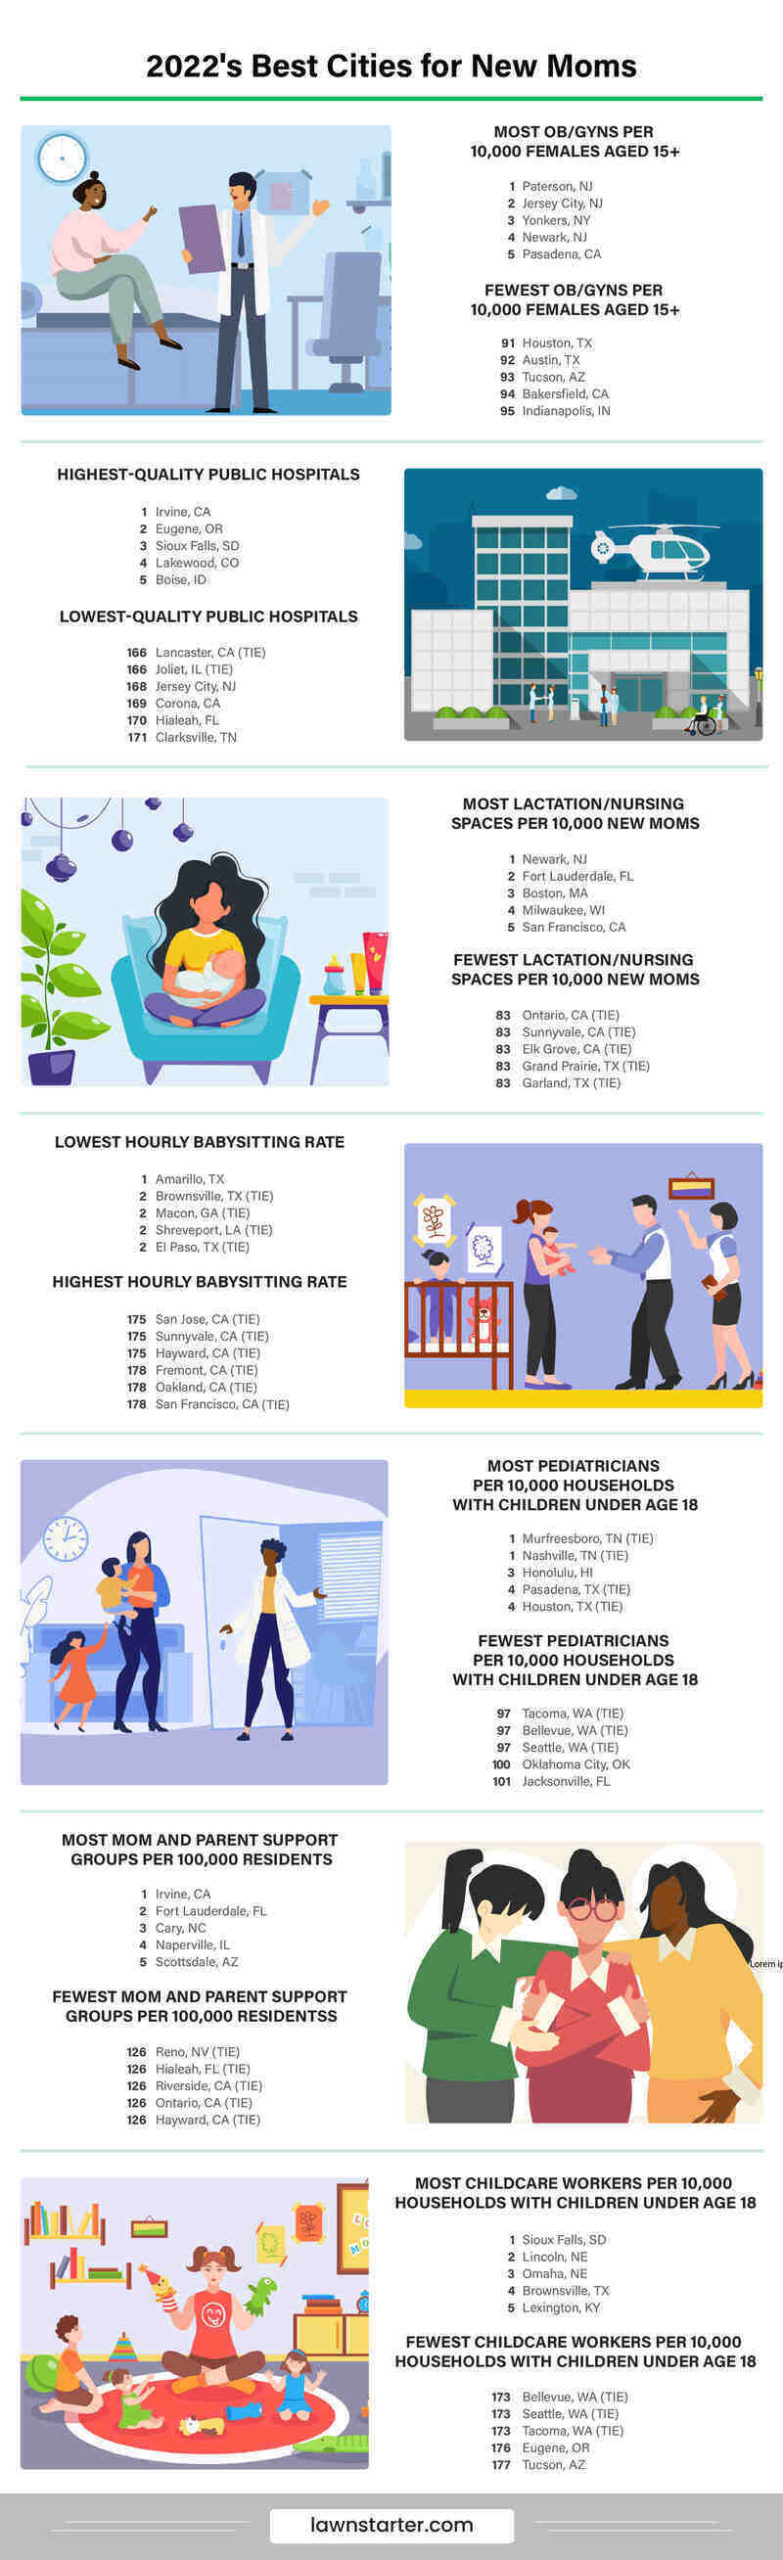 Infographic showing the best cities for new moms, a ranking based on maternity and child care access, mom-friendly policies, safety, affordability, and more